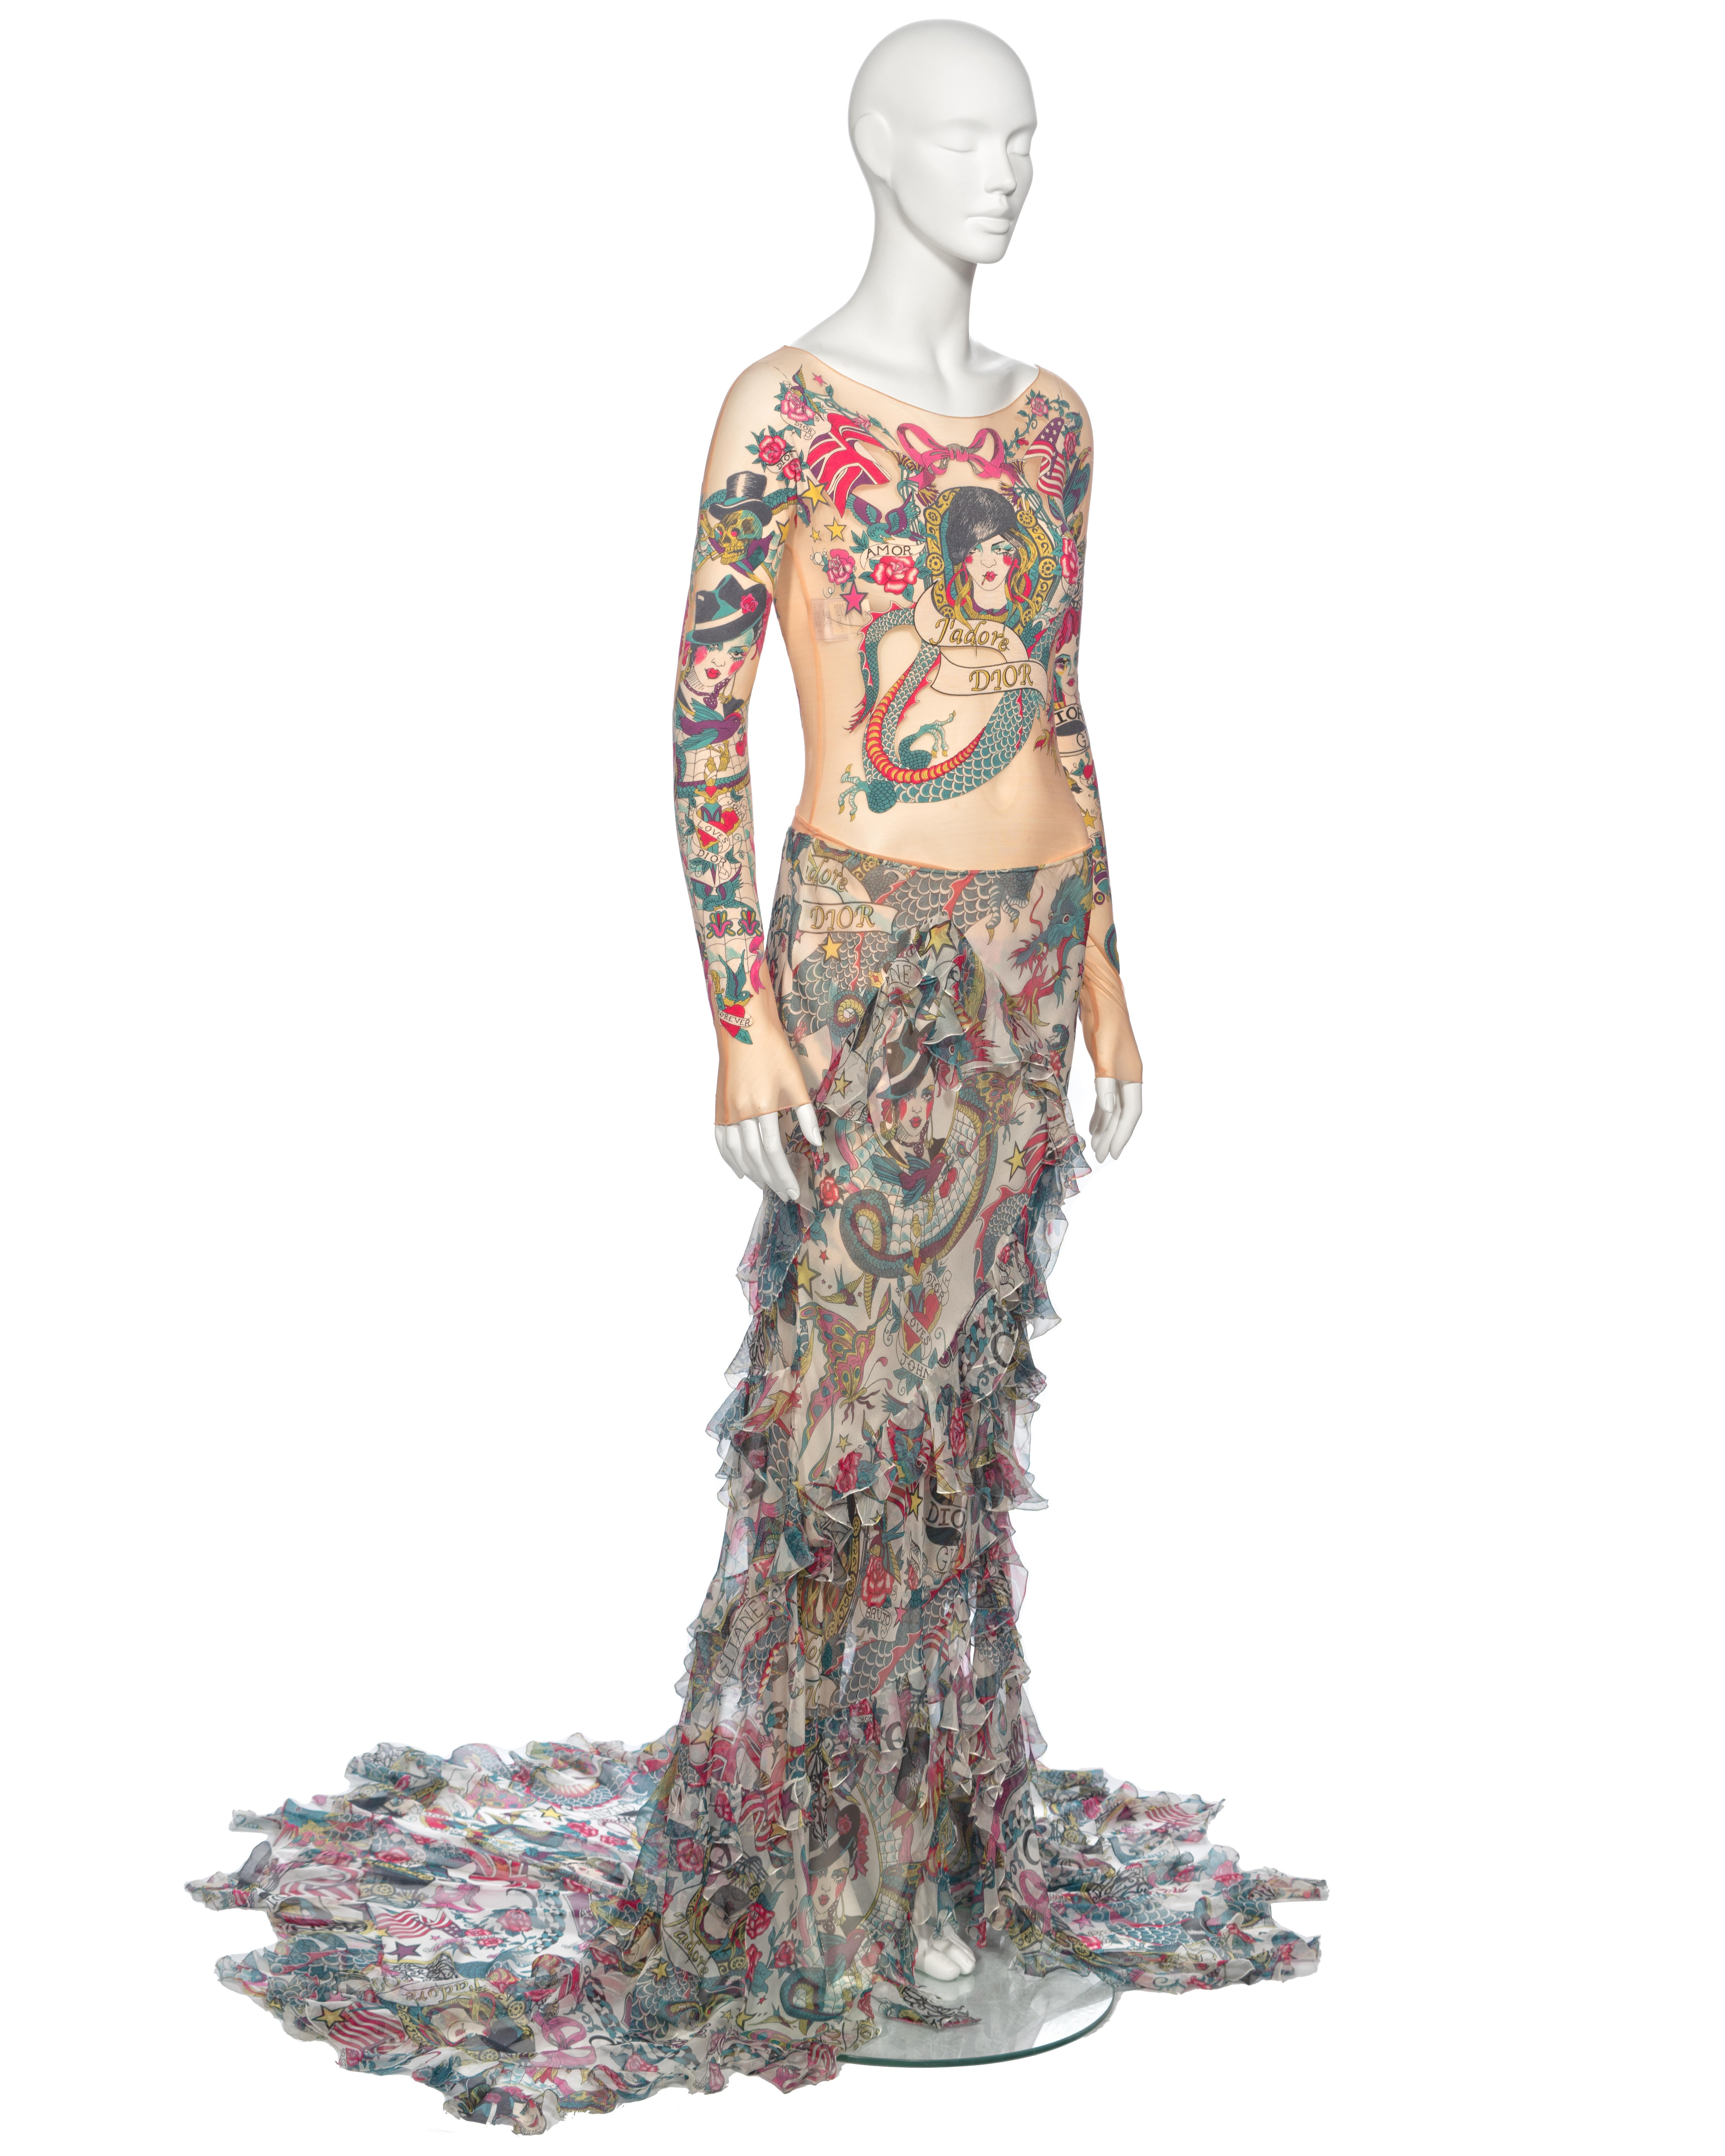 Christian Dior by John Galliano Tattoo Print Body, Leggings and Skirt, ss 2004 For Sale 3